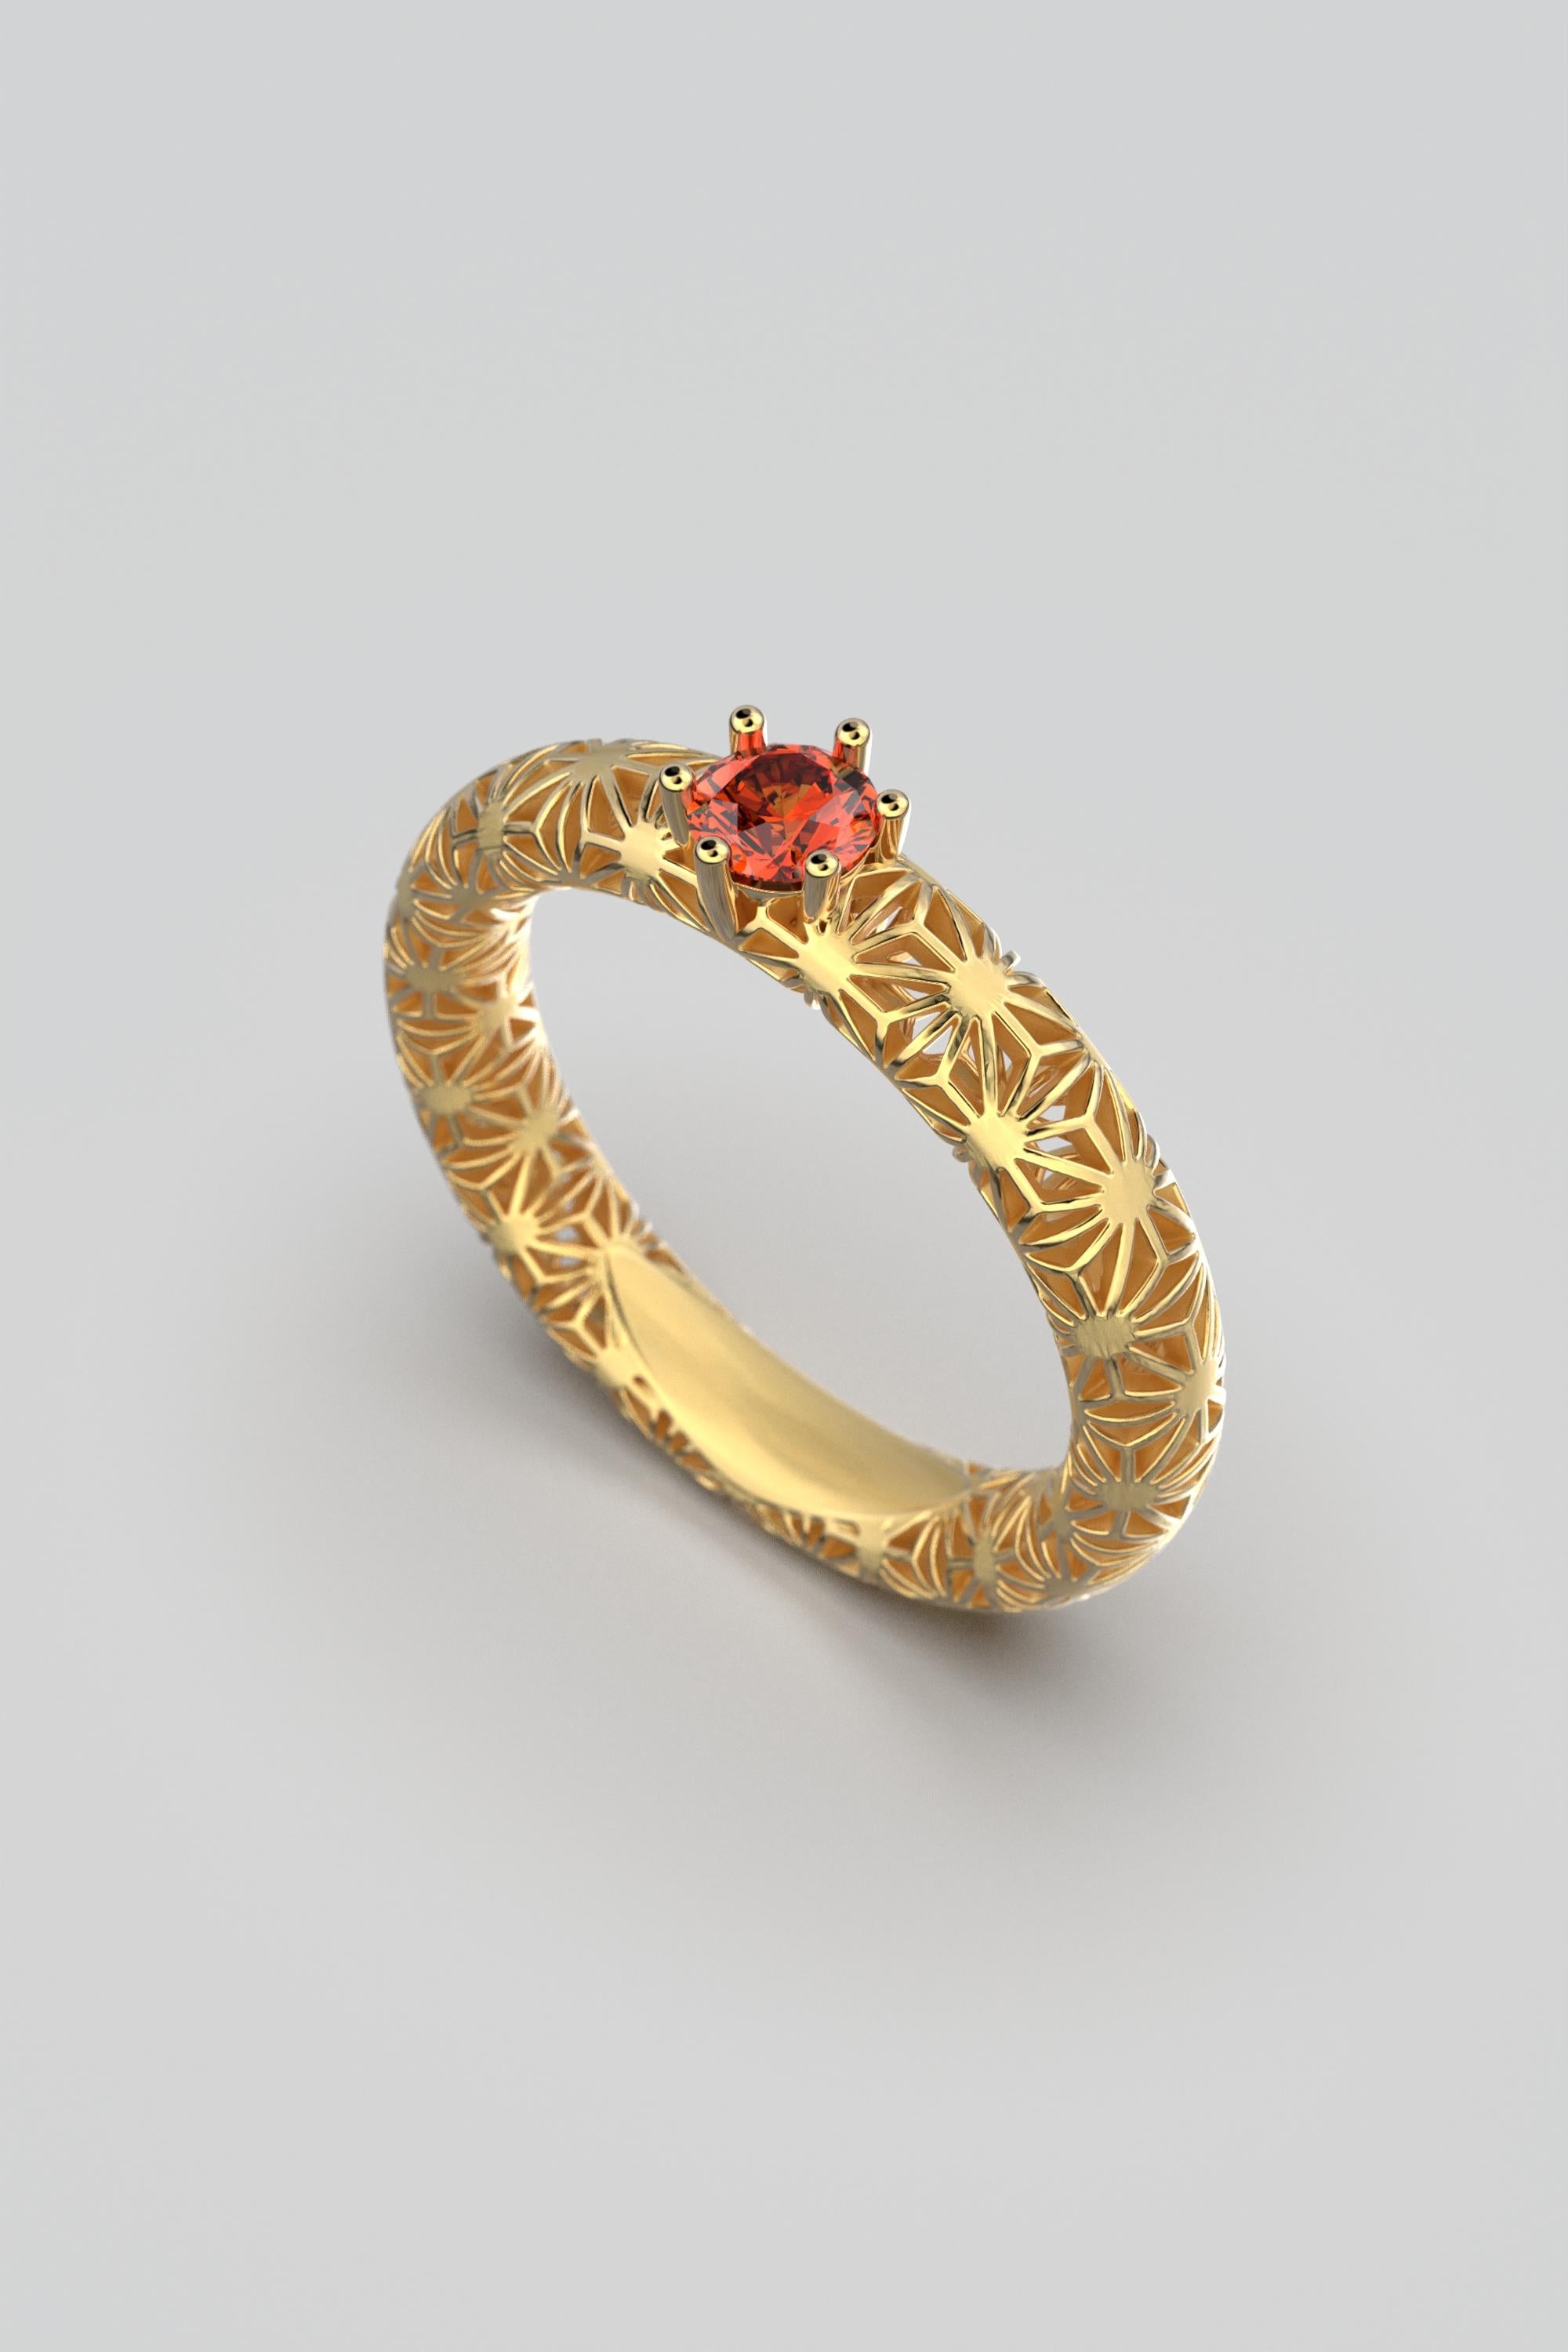 For Sale:  Orange Sapphire 18k Gold Band, Sashiko Pattern Gold Ring By Oltremare Gioielli 2